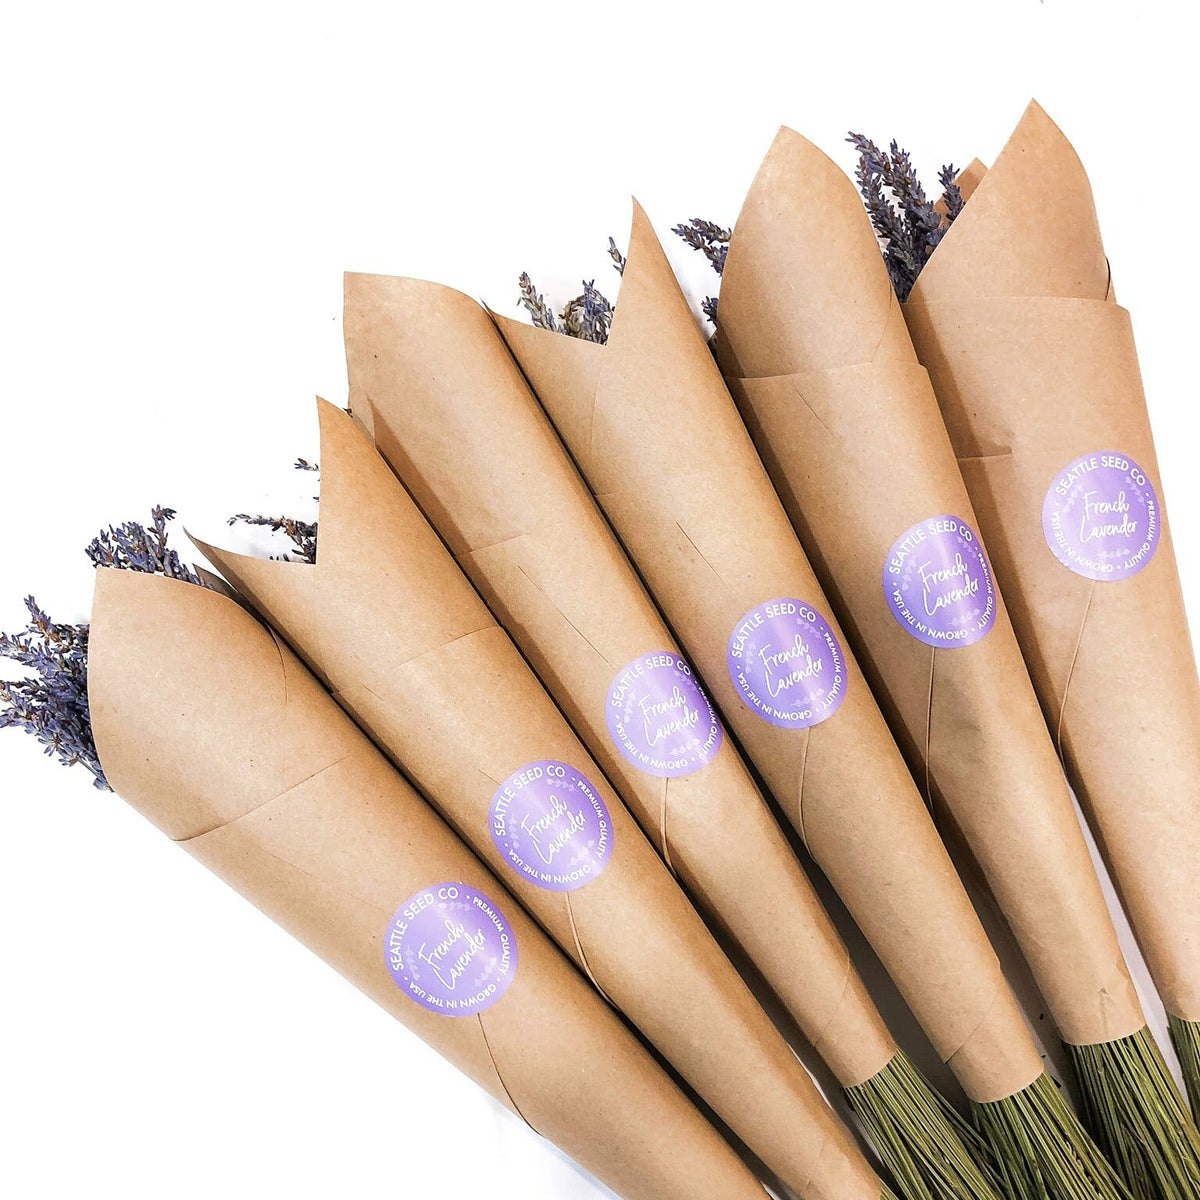 Seattle Seed Co. - Dried French Lavender Bundles